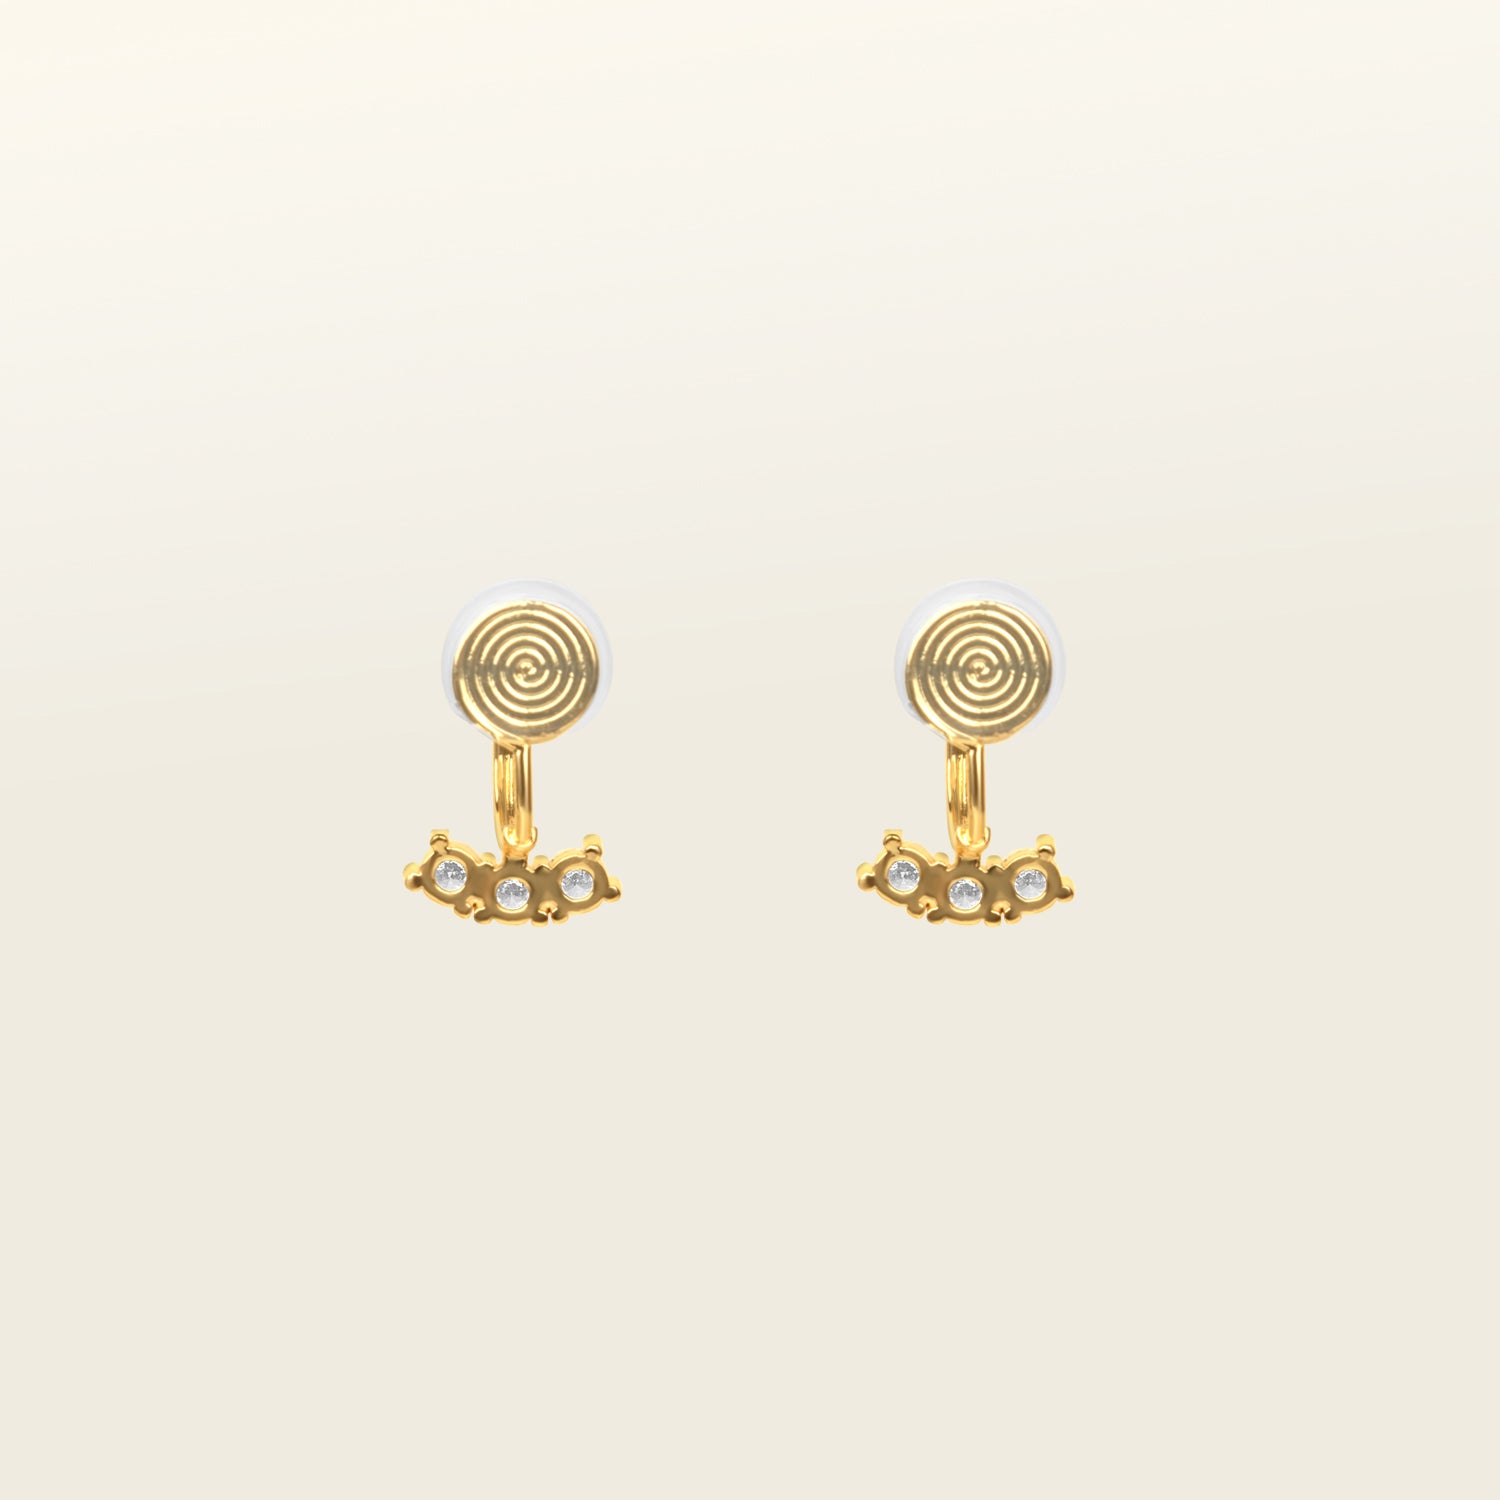  Image of the Juliette Clip-On Earrings offer a medium-strength, secure hold that lasts 24 hours. Easily adjustable with a gentle squeeze, these Mosquito Coil Clip-Ons are ideal for thick/large ears as well as sensitive ears. Crafted with gold-tone plated metal alloy and cubic zirconia, this item is sold as a single pair.